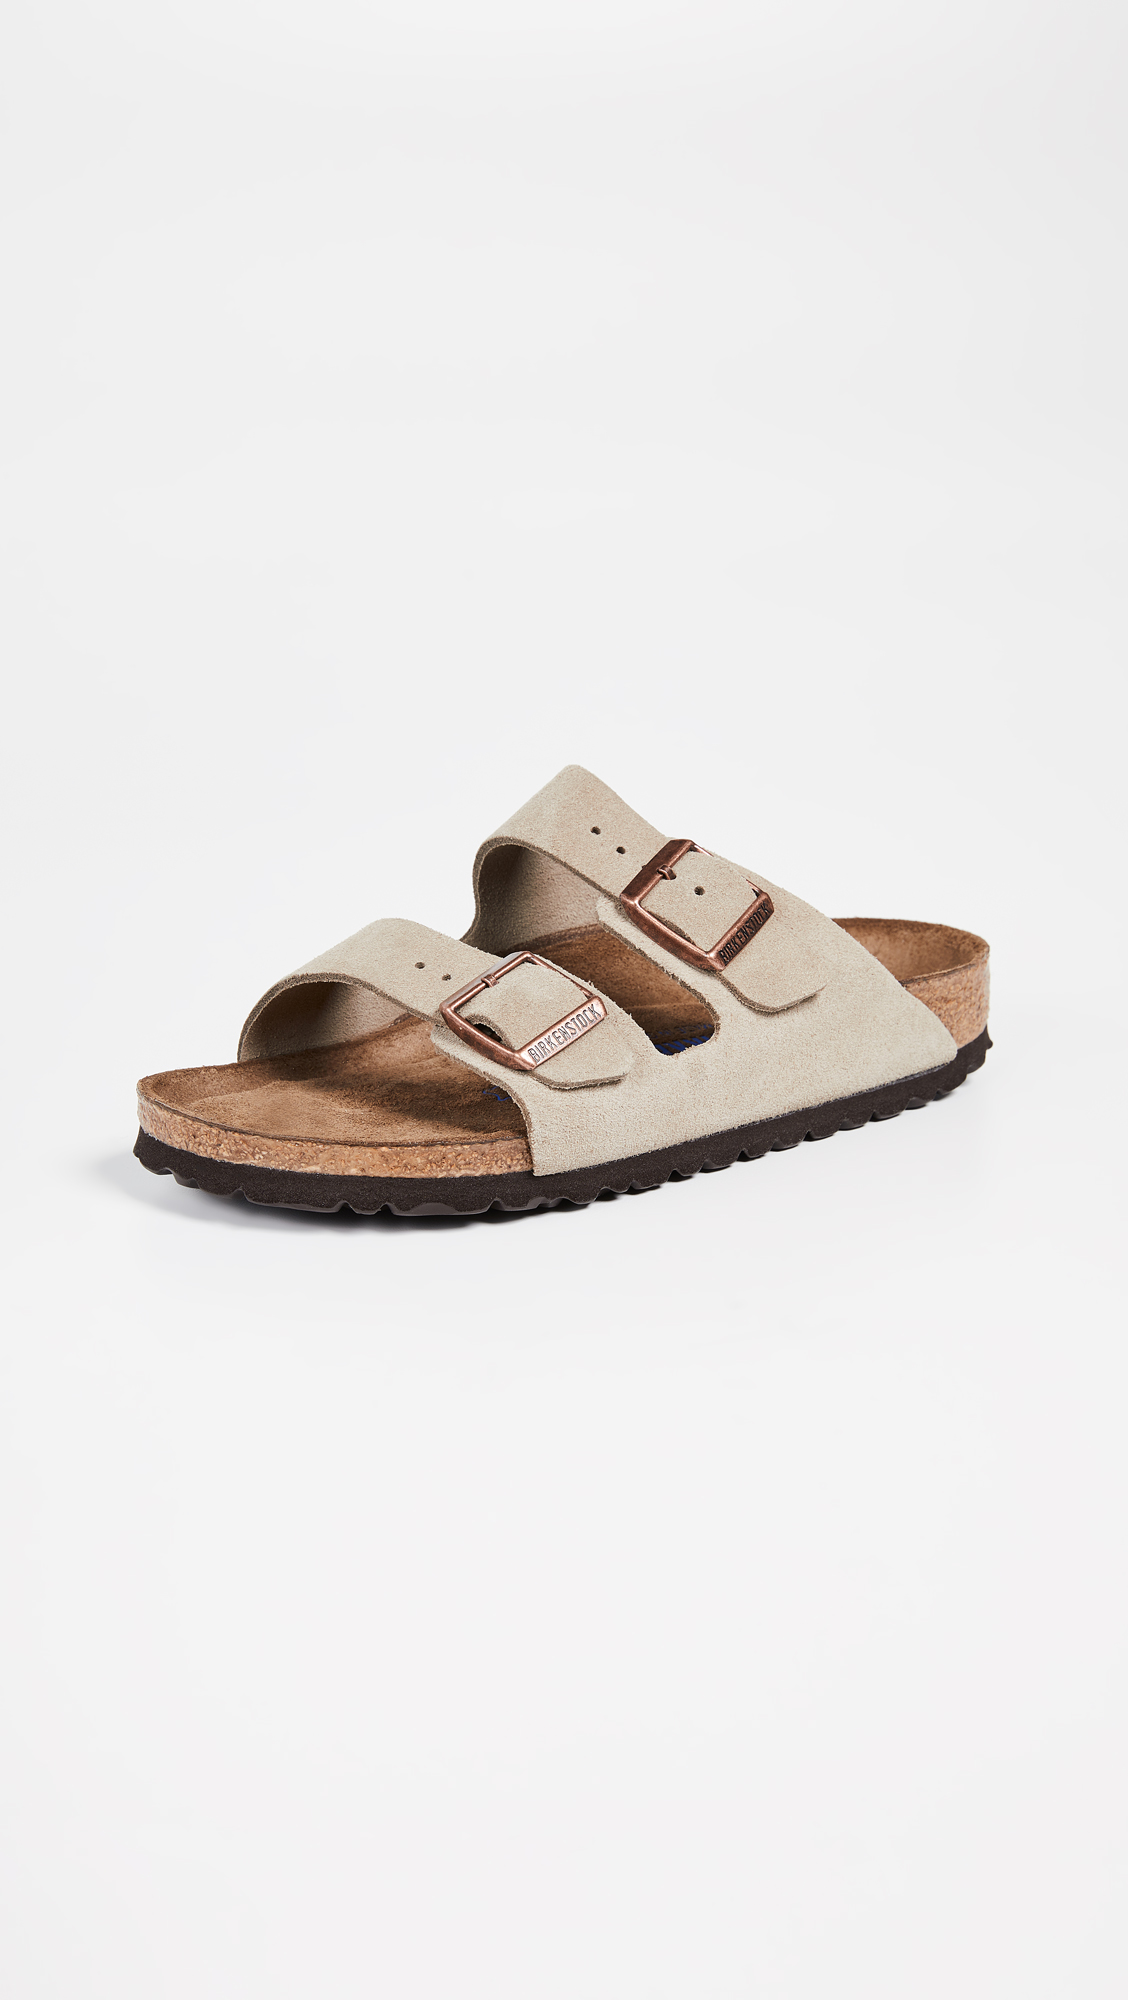 shoes as comfortable as birkenstocks